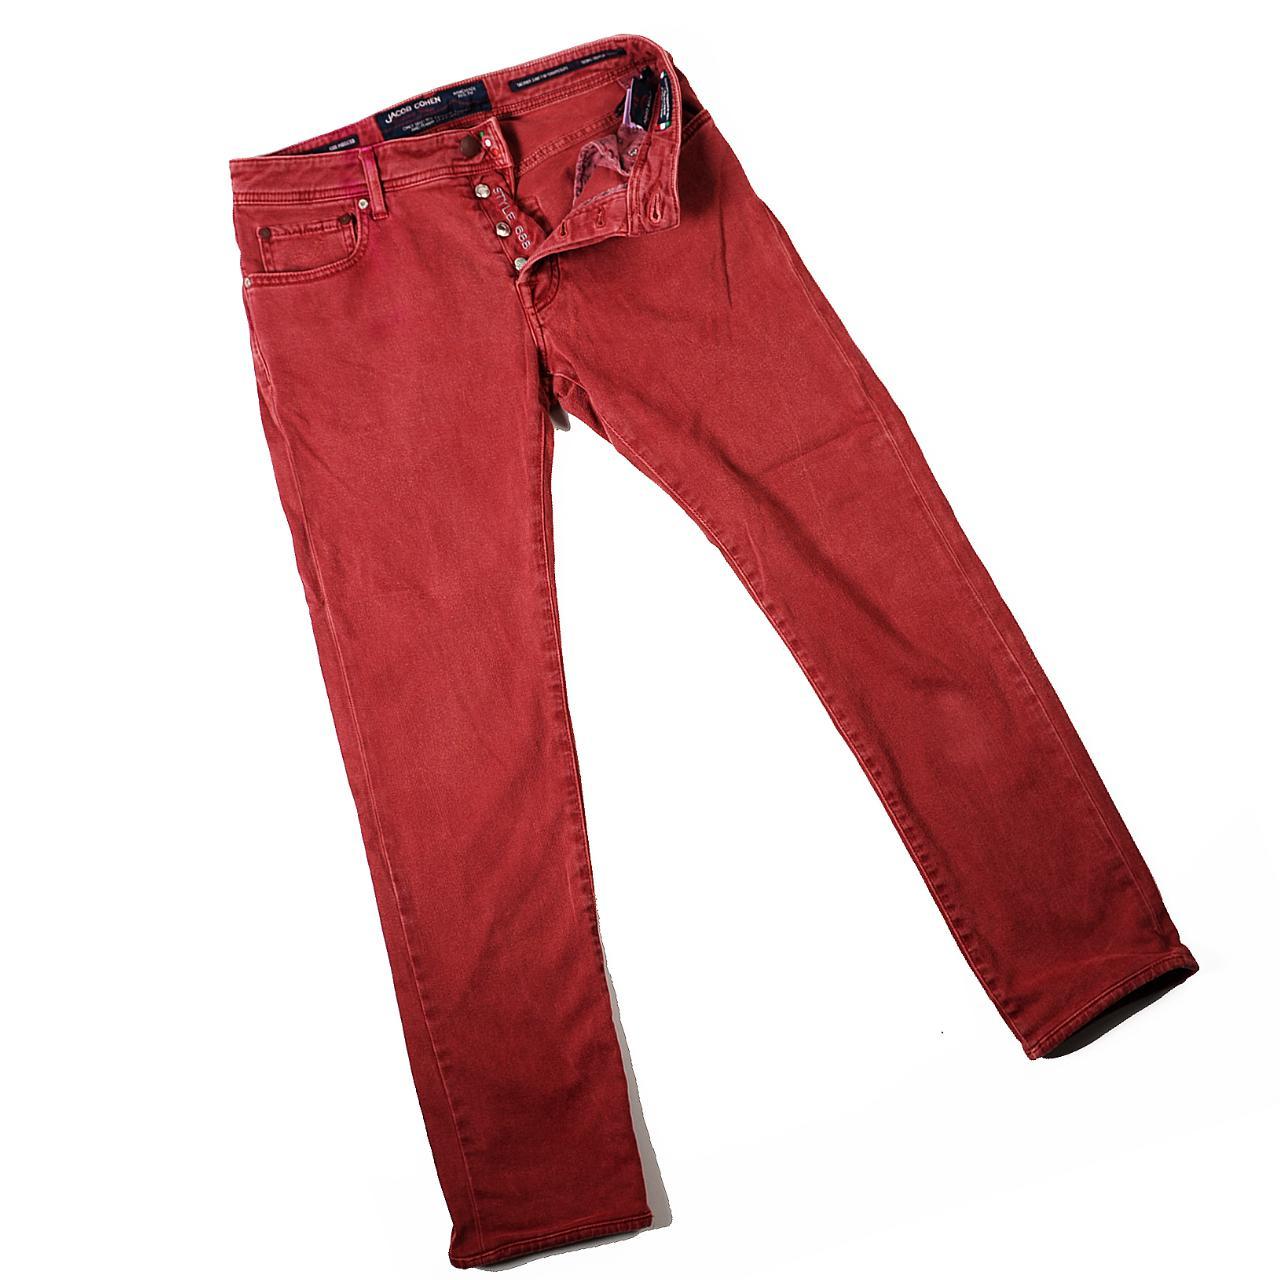 Product Image 1 - Jacob Cohen Tailored Jeans. Exclusively